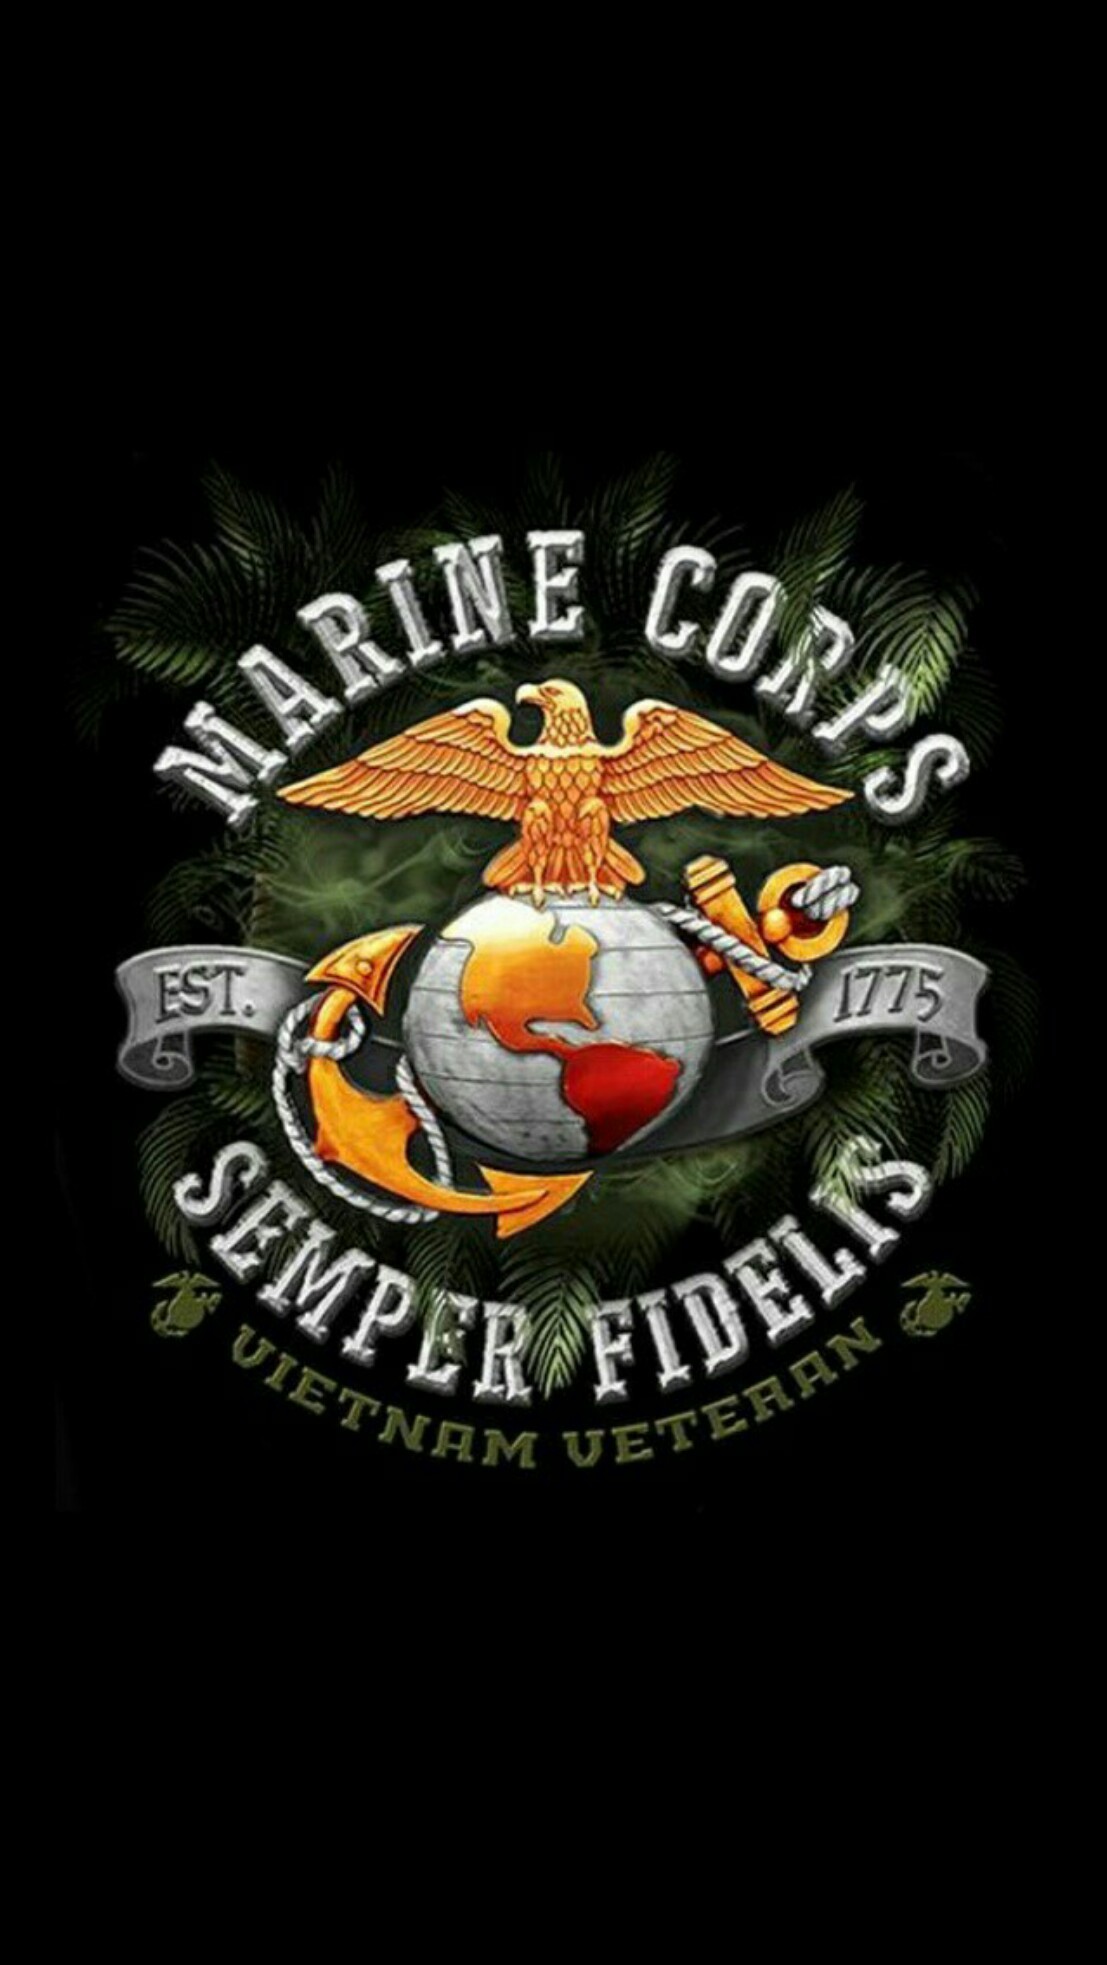 USMC Wallpaper for iPhone (52+ images)